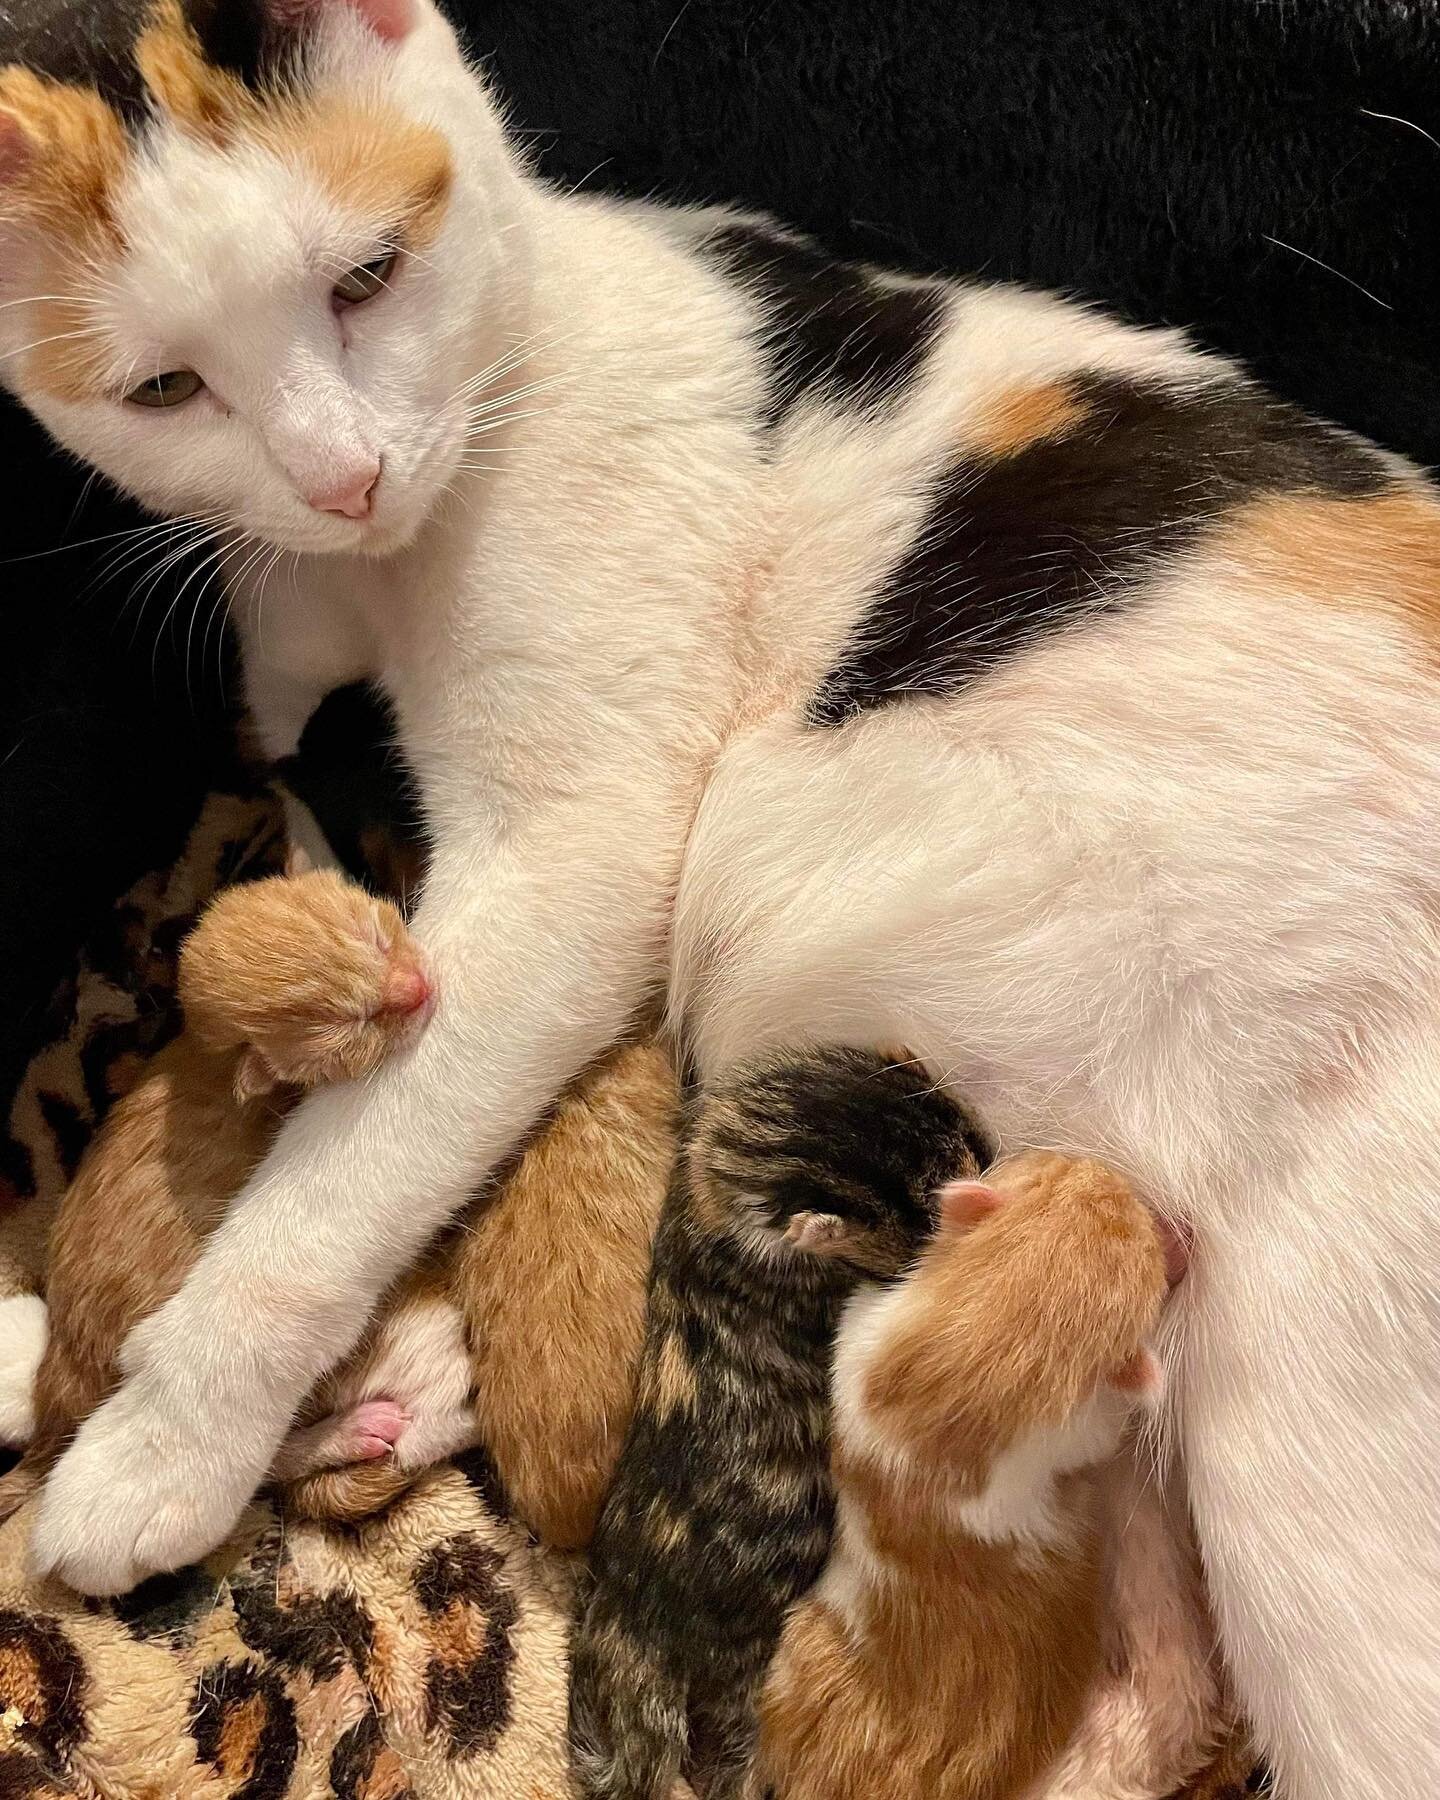 A little while back when we took a bunch of pregnant cats from the pound we were given the wrong cat. 
Never in a million years would we have sent her back so we found her a foster home and as it turns out,  she was pregnant!

Yesterday, Florence gav